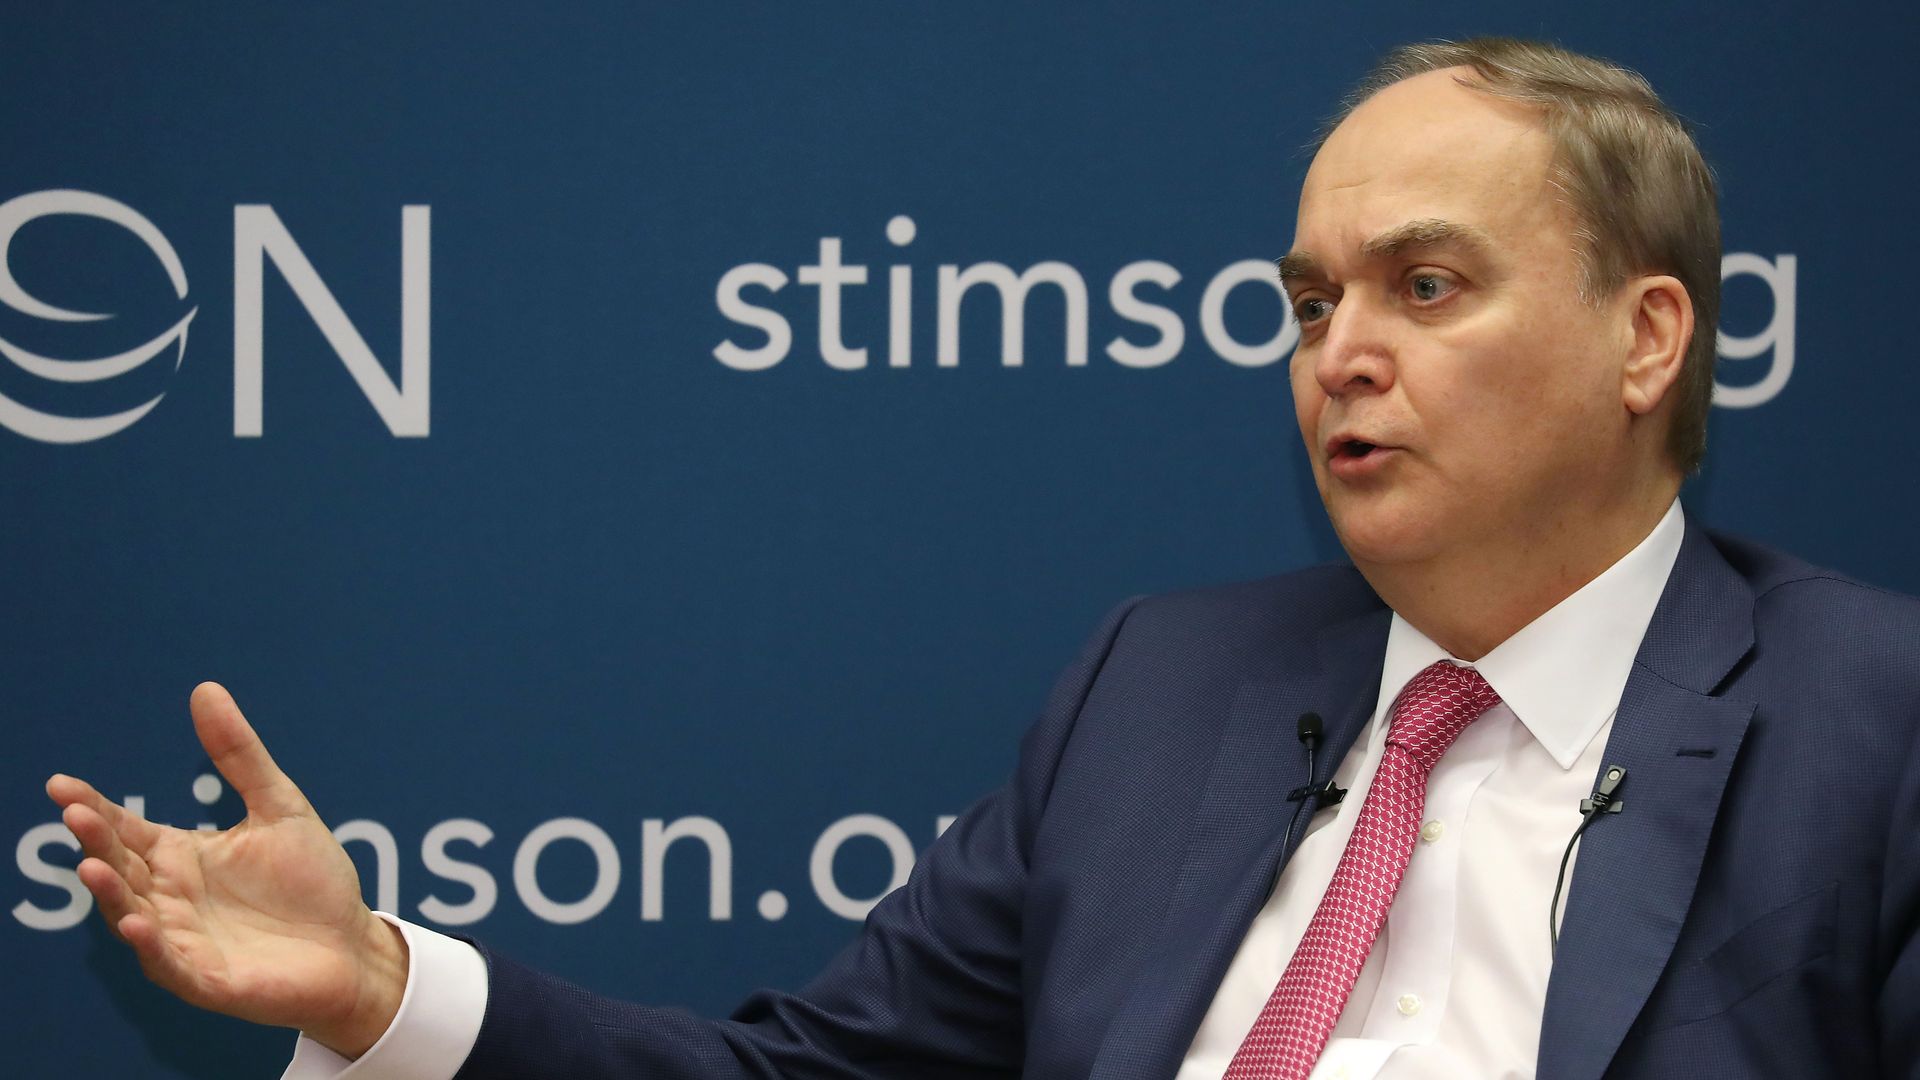 Russian Ambassador to the United States Anatoly Antonov speaks at an event